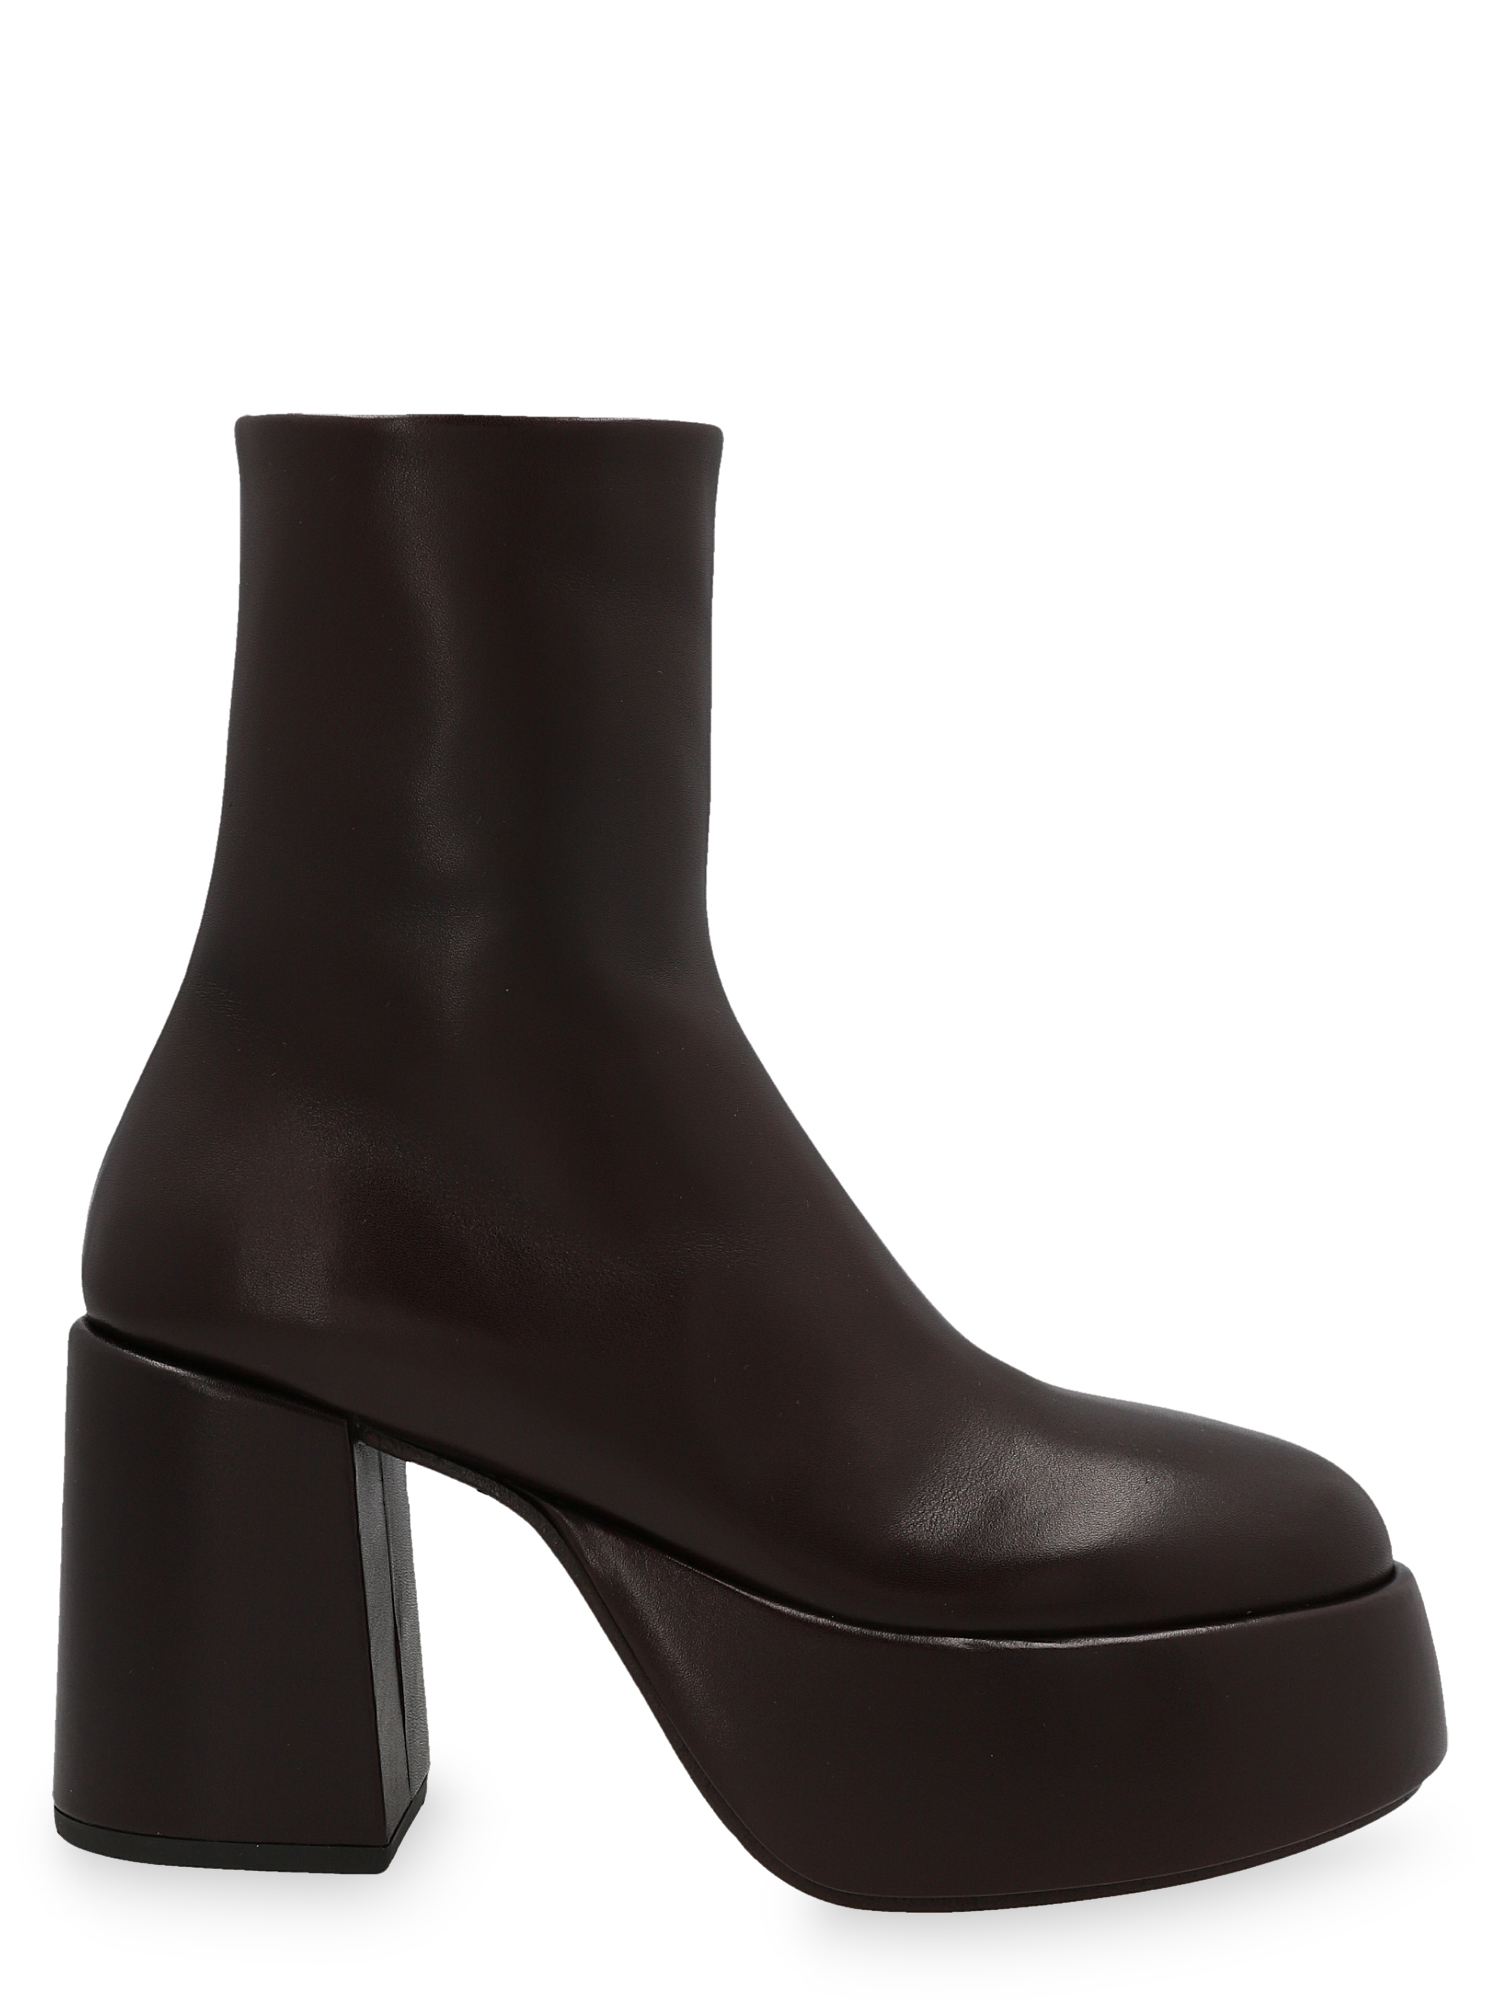 MARSÈLL WOMEN'S ANKLE BOOTS - MARSELL - IN BROWN LEATHER